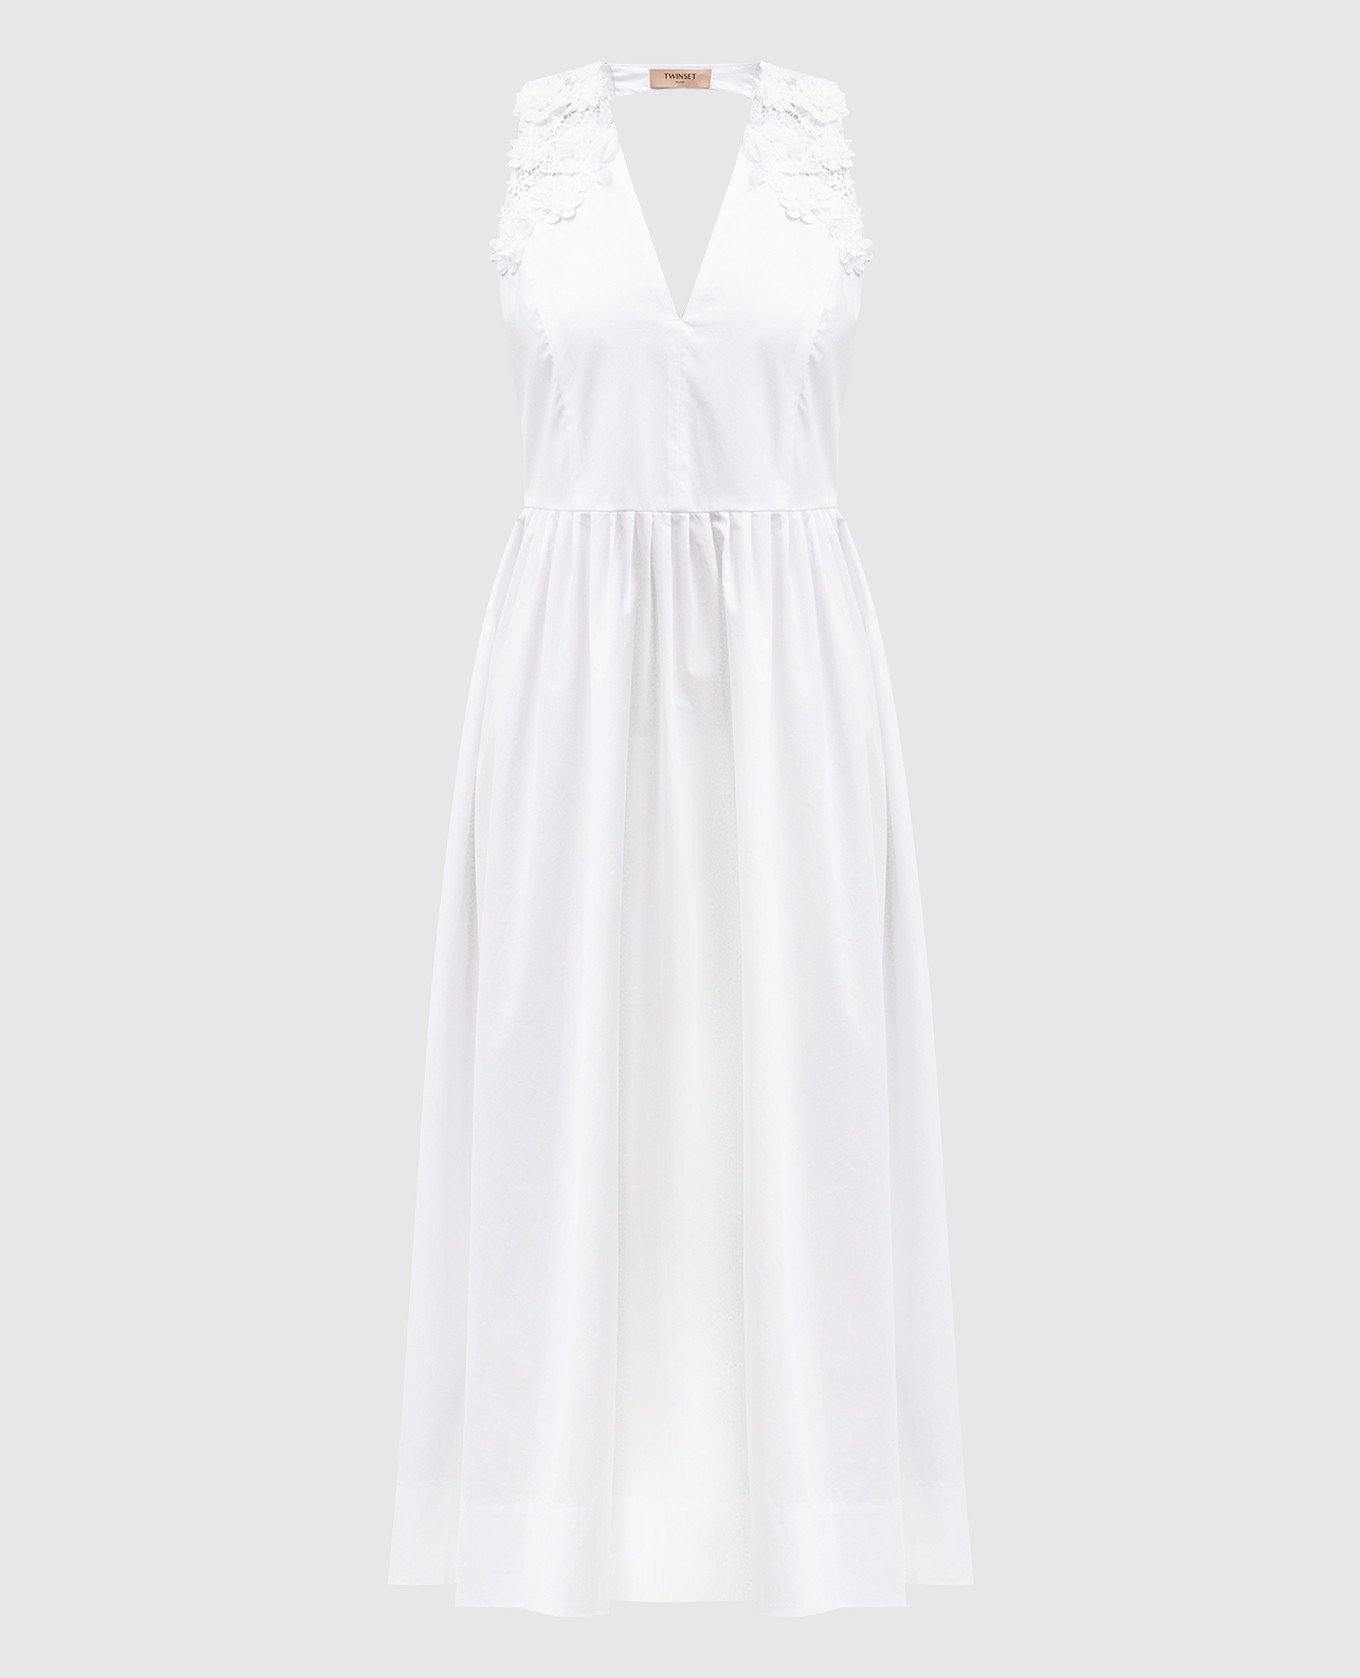 White midi dress with lace in the form of flowers